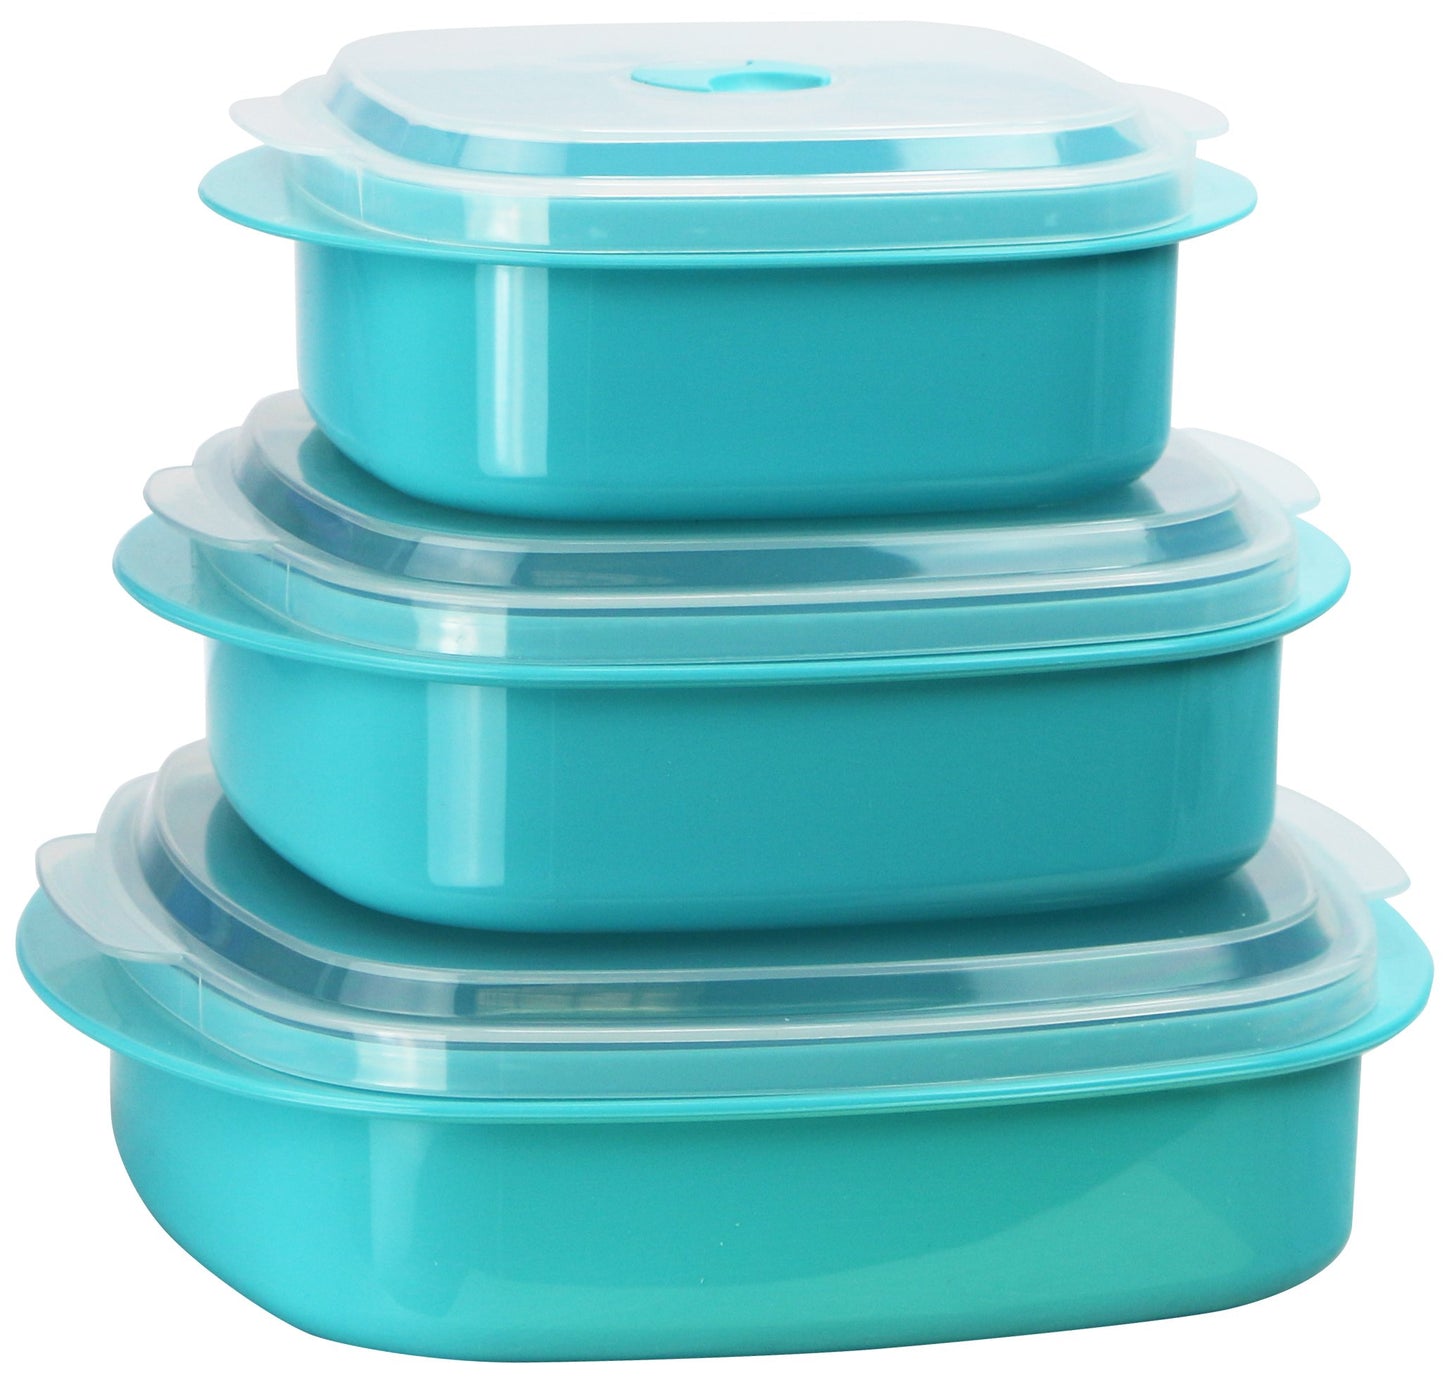 stack of 3 turquoise storage containers with lids on white background.